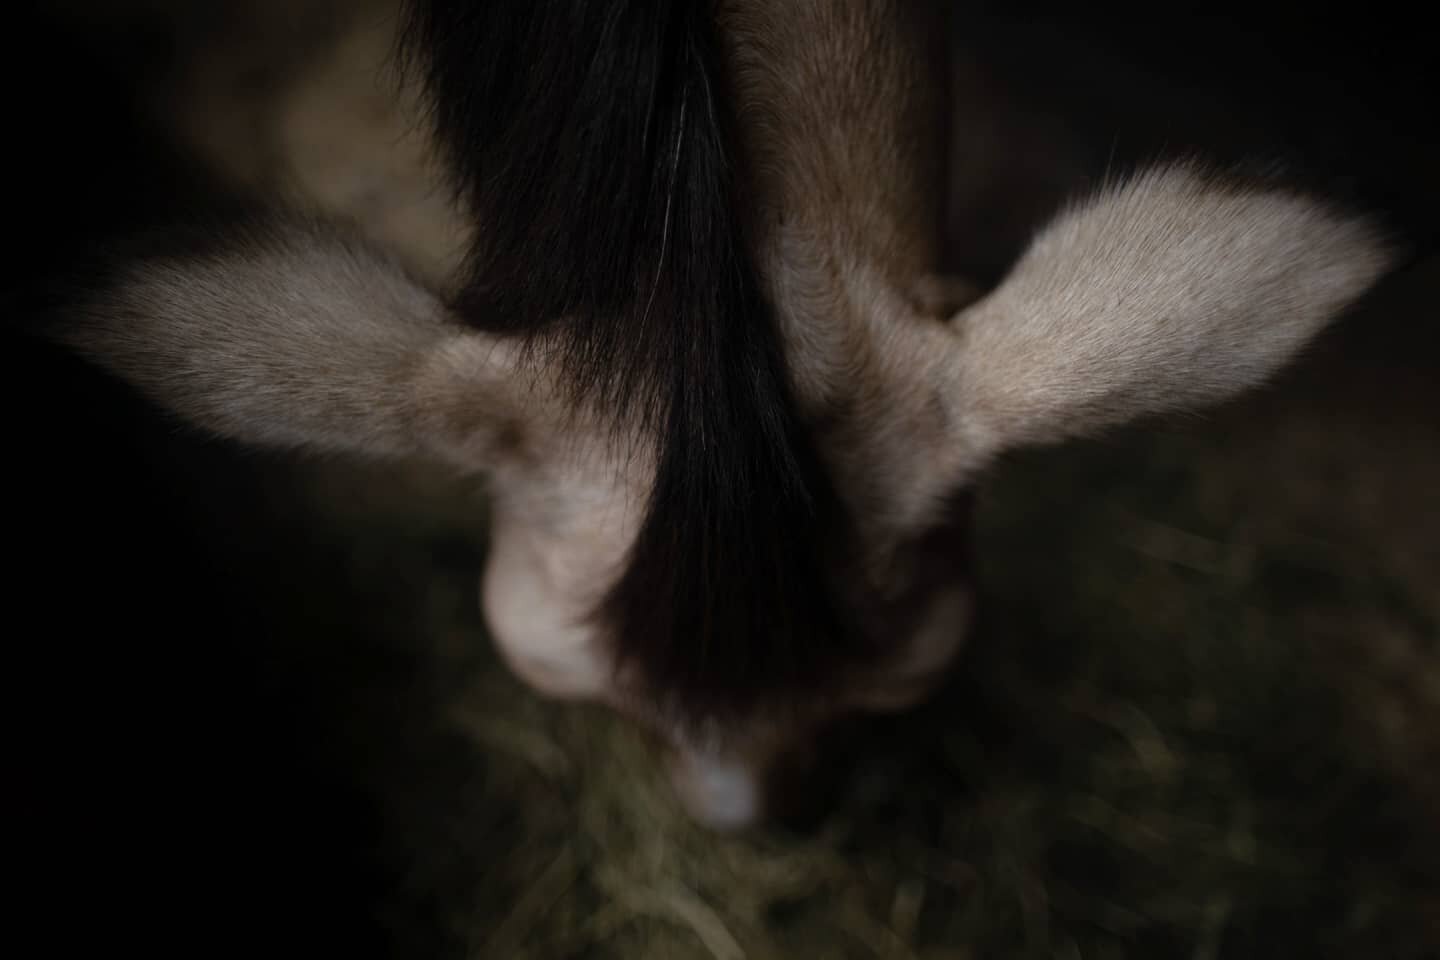 A friend asked me to take a photo of her horse. Hope she likes it. Probably should have taken more than one just in case. #ponypics #differentperspective #demears